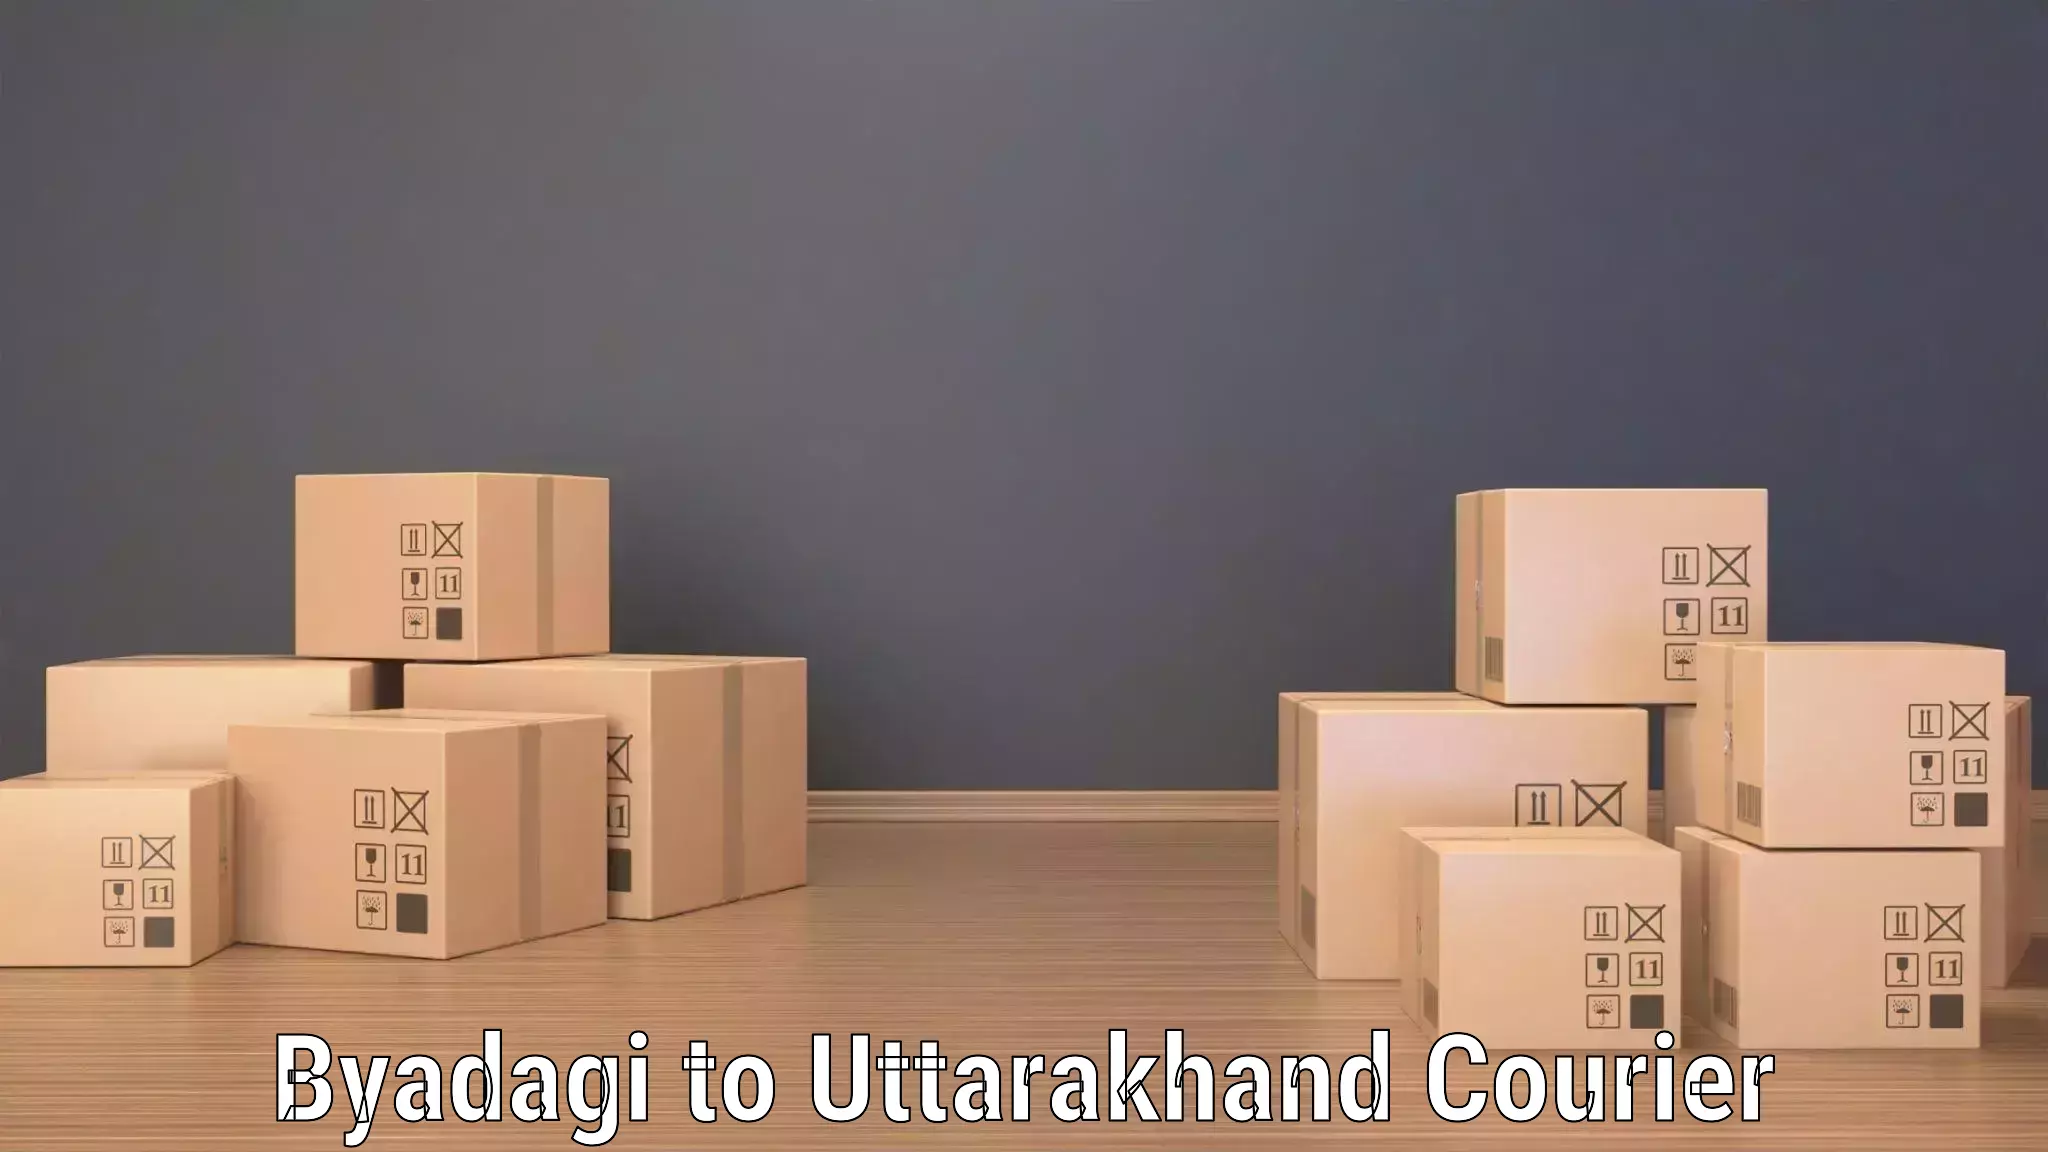 Same-day delivery options Byadagi to Bhagwanpur